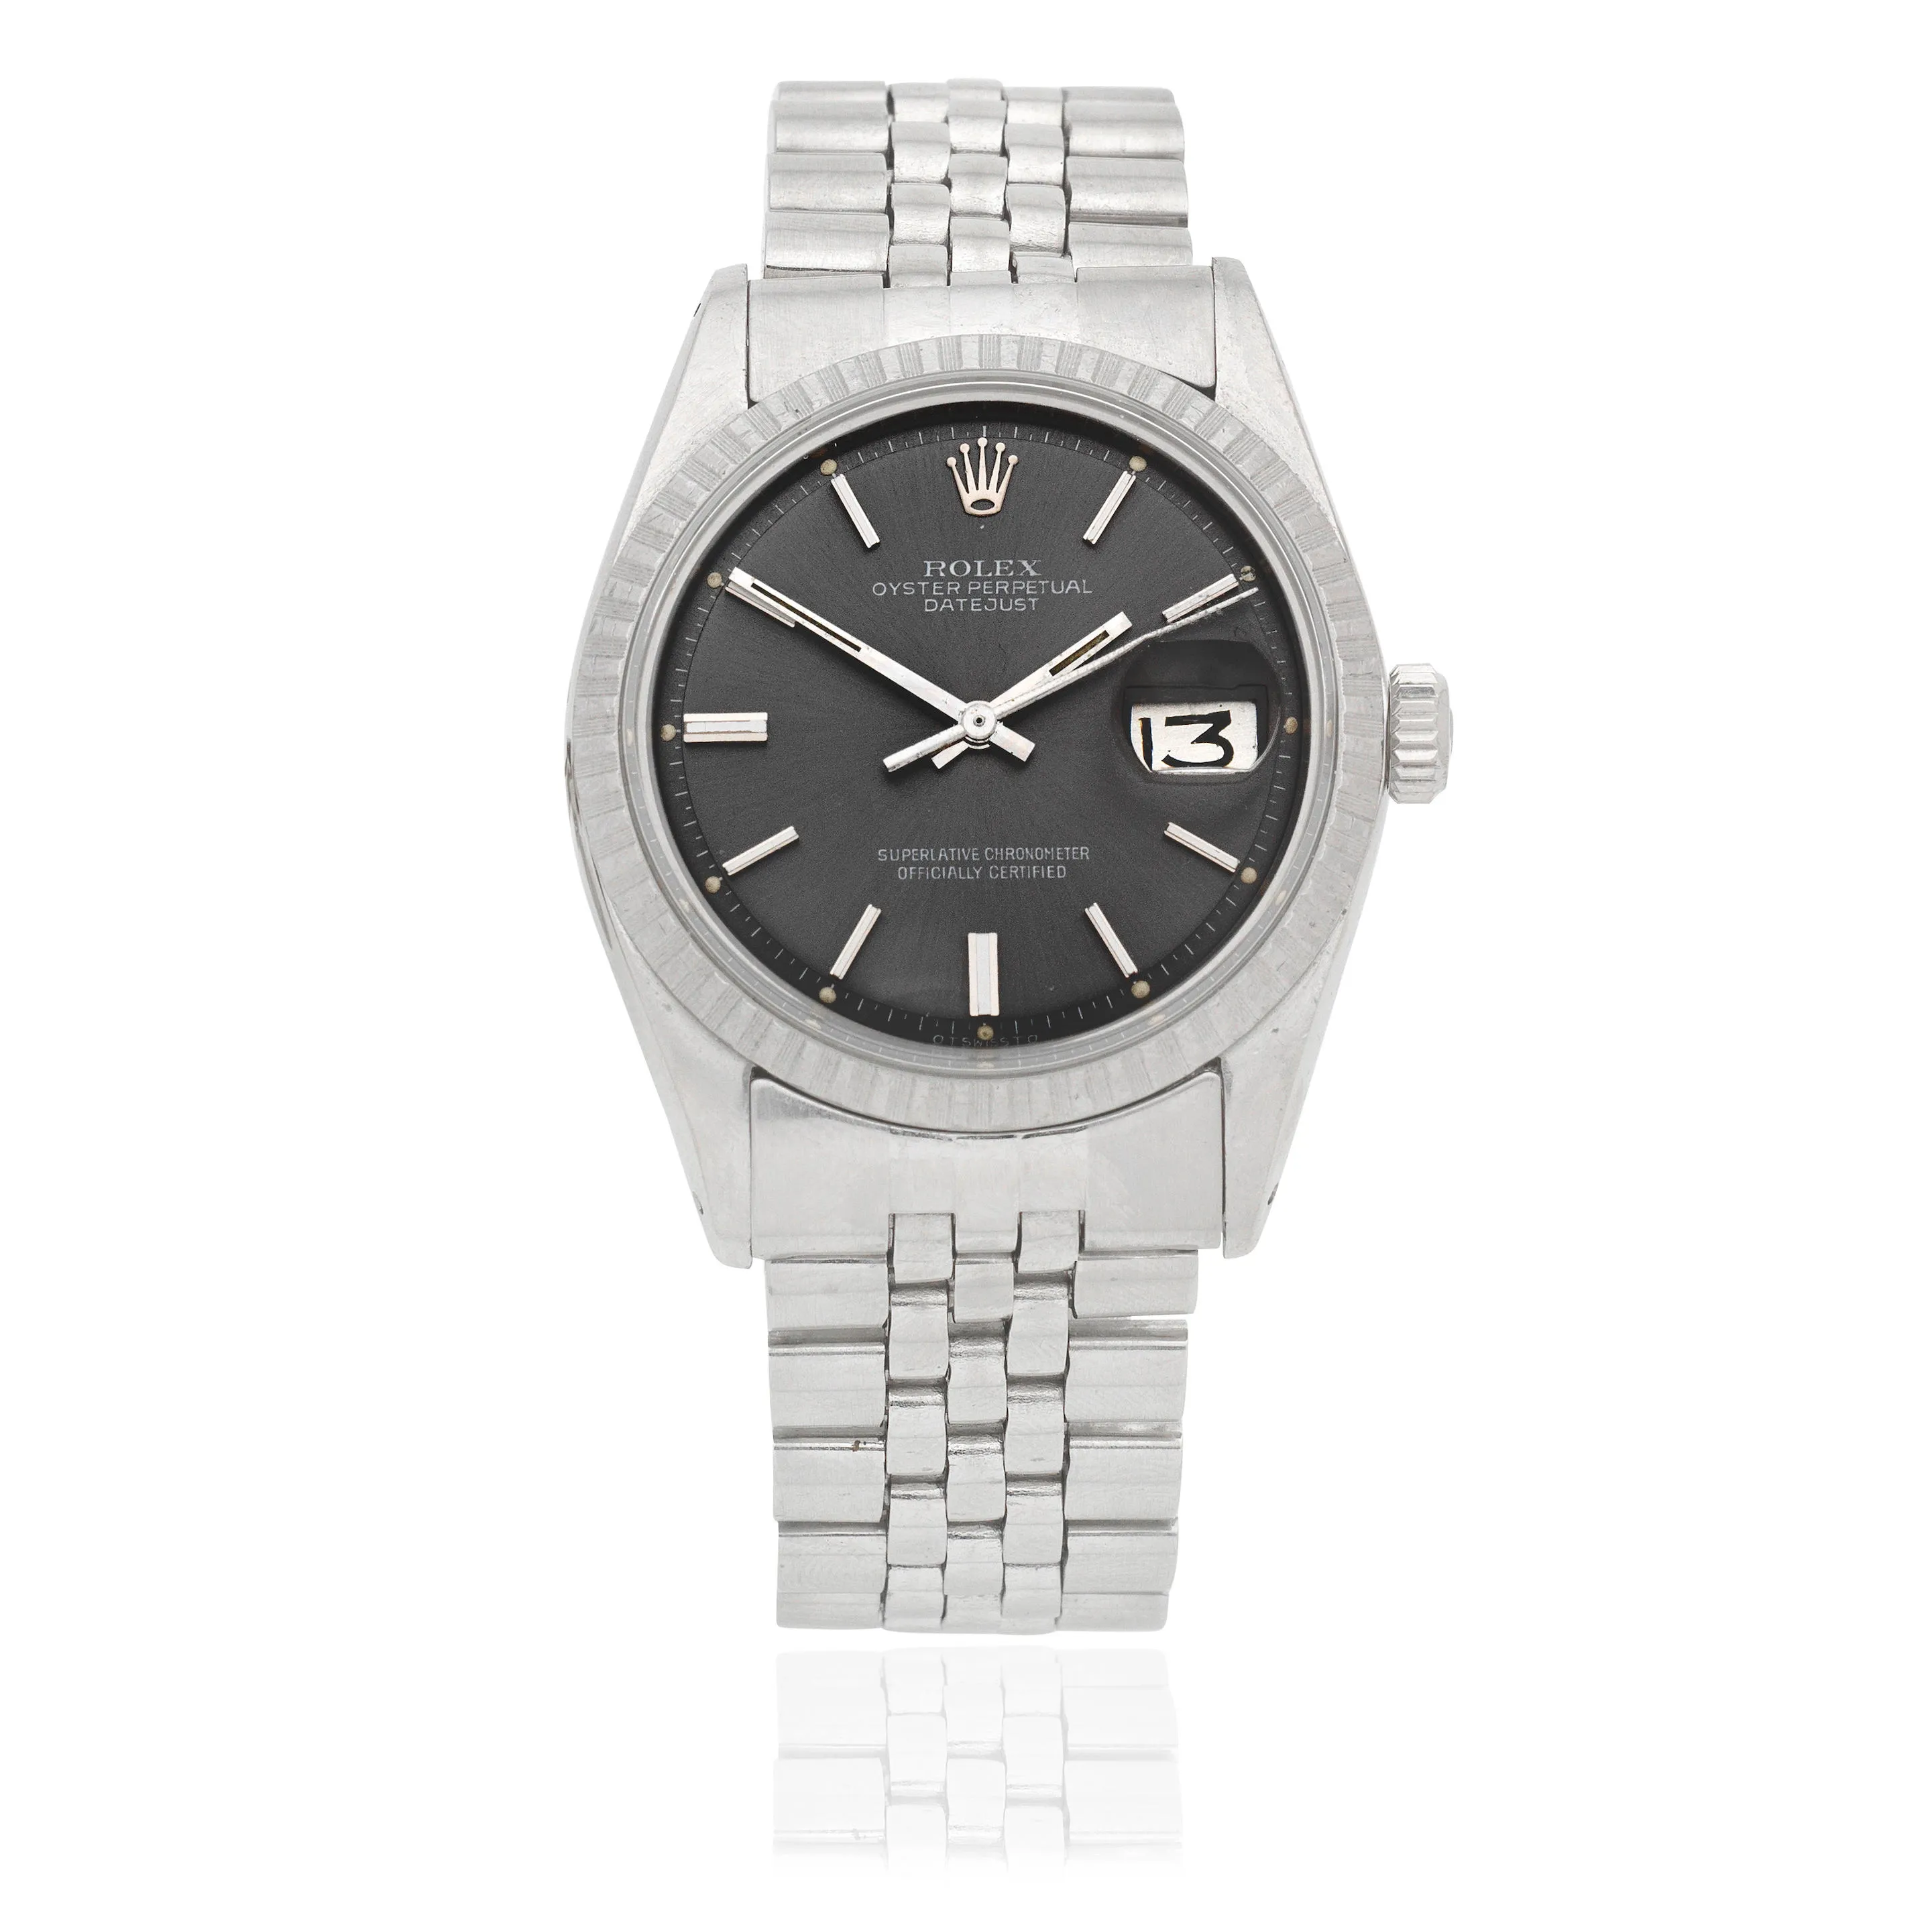 Rolex Datejust 1603 36mm Stainless steel Gray